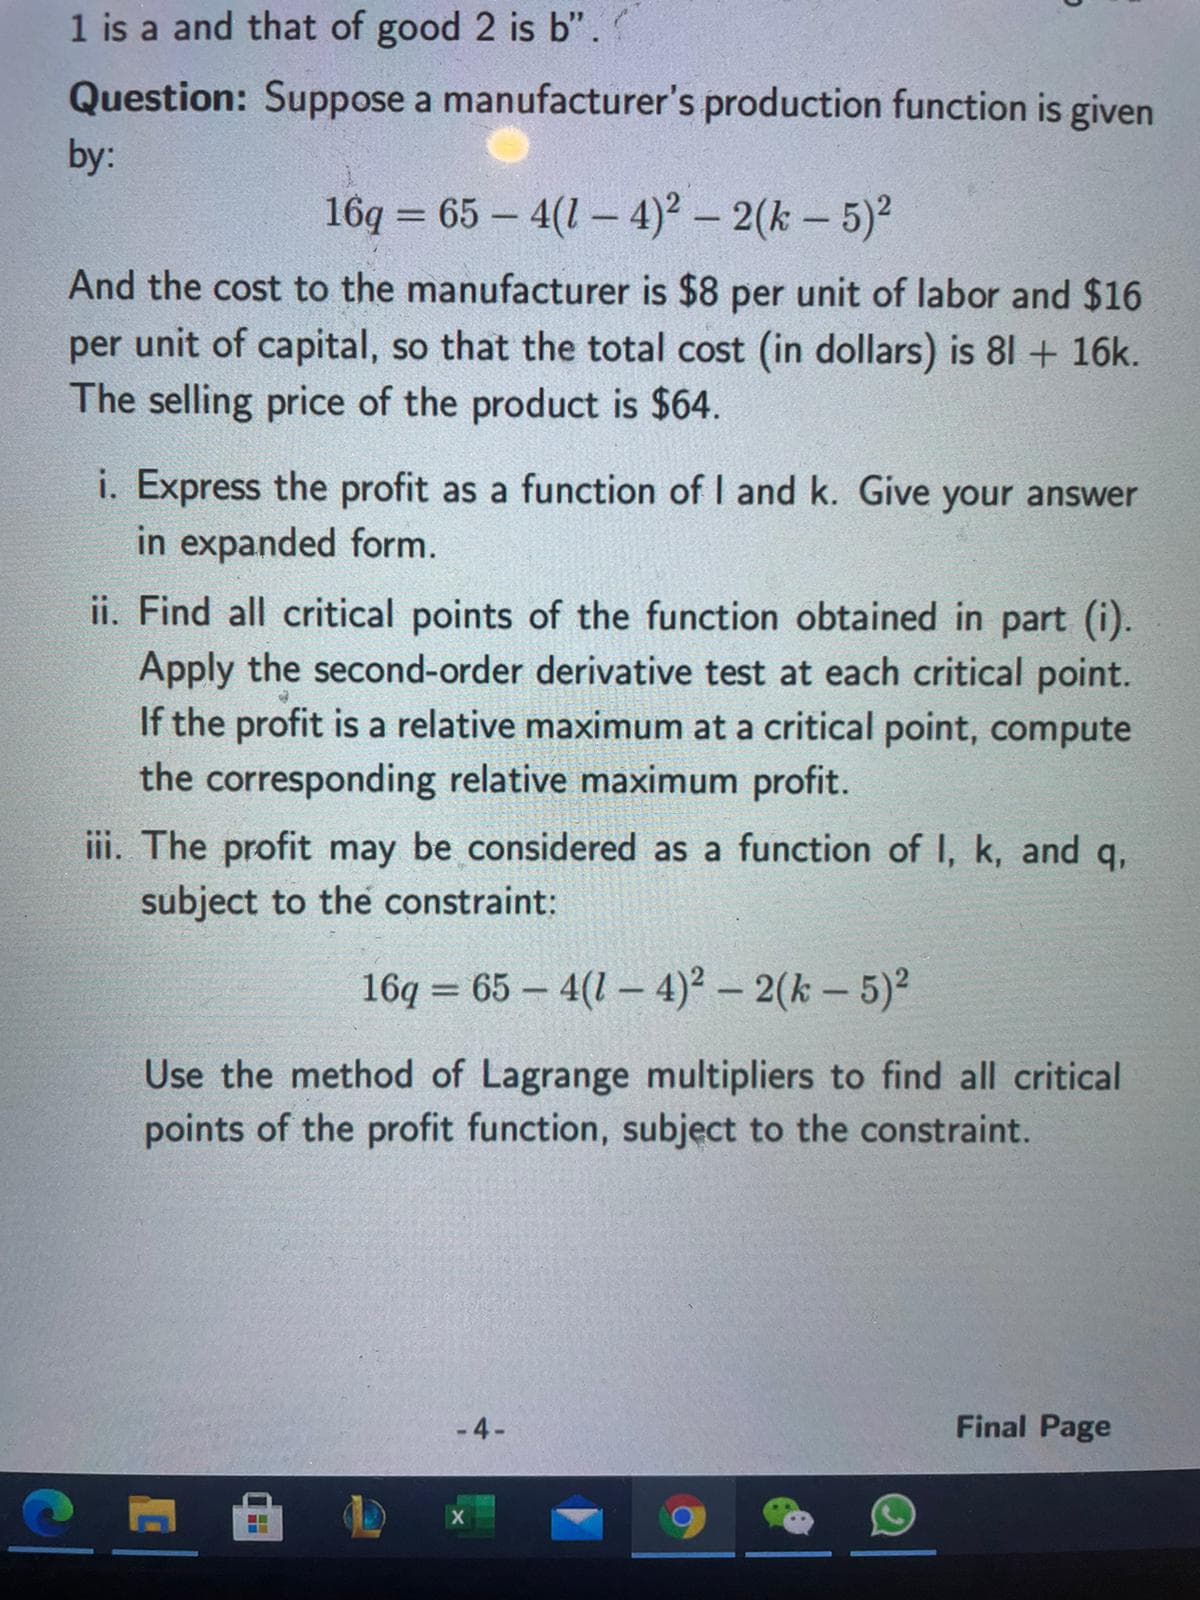 1 is a and that of good 2 is b'".
Question: Suppose a manufacturer's production function is given
by:
16q = 65 – 4(1 – 4)² – 2(k – 5)2
And the cost to the manufacturer is $8 per unit of labor and $16
per unit of capital, so that the total cost (in dollars) is 81 + 16k.
The selling price of the product is $64.
i. Express the profit as a function of I and k. Give your answer
in expanded form.
ii. Find all critical points of the function obtained in part (i).
Apply the second-order derivative test at each critical point.
If the profit is a relative maximum at a critical point, compute
the corresponding relative maximum profit.
iii. The profit may be considered as a function of I, k, and q,
subject to the constraint:
16q = 65 – 4(1 – 4)? – 2(k – 5)2
Use the method of Lagrange multipliers to find all critical
points of the profit function, subject to the constraint.
-4-
Final Page
